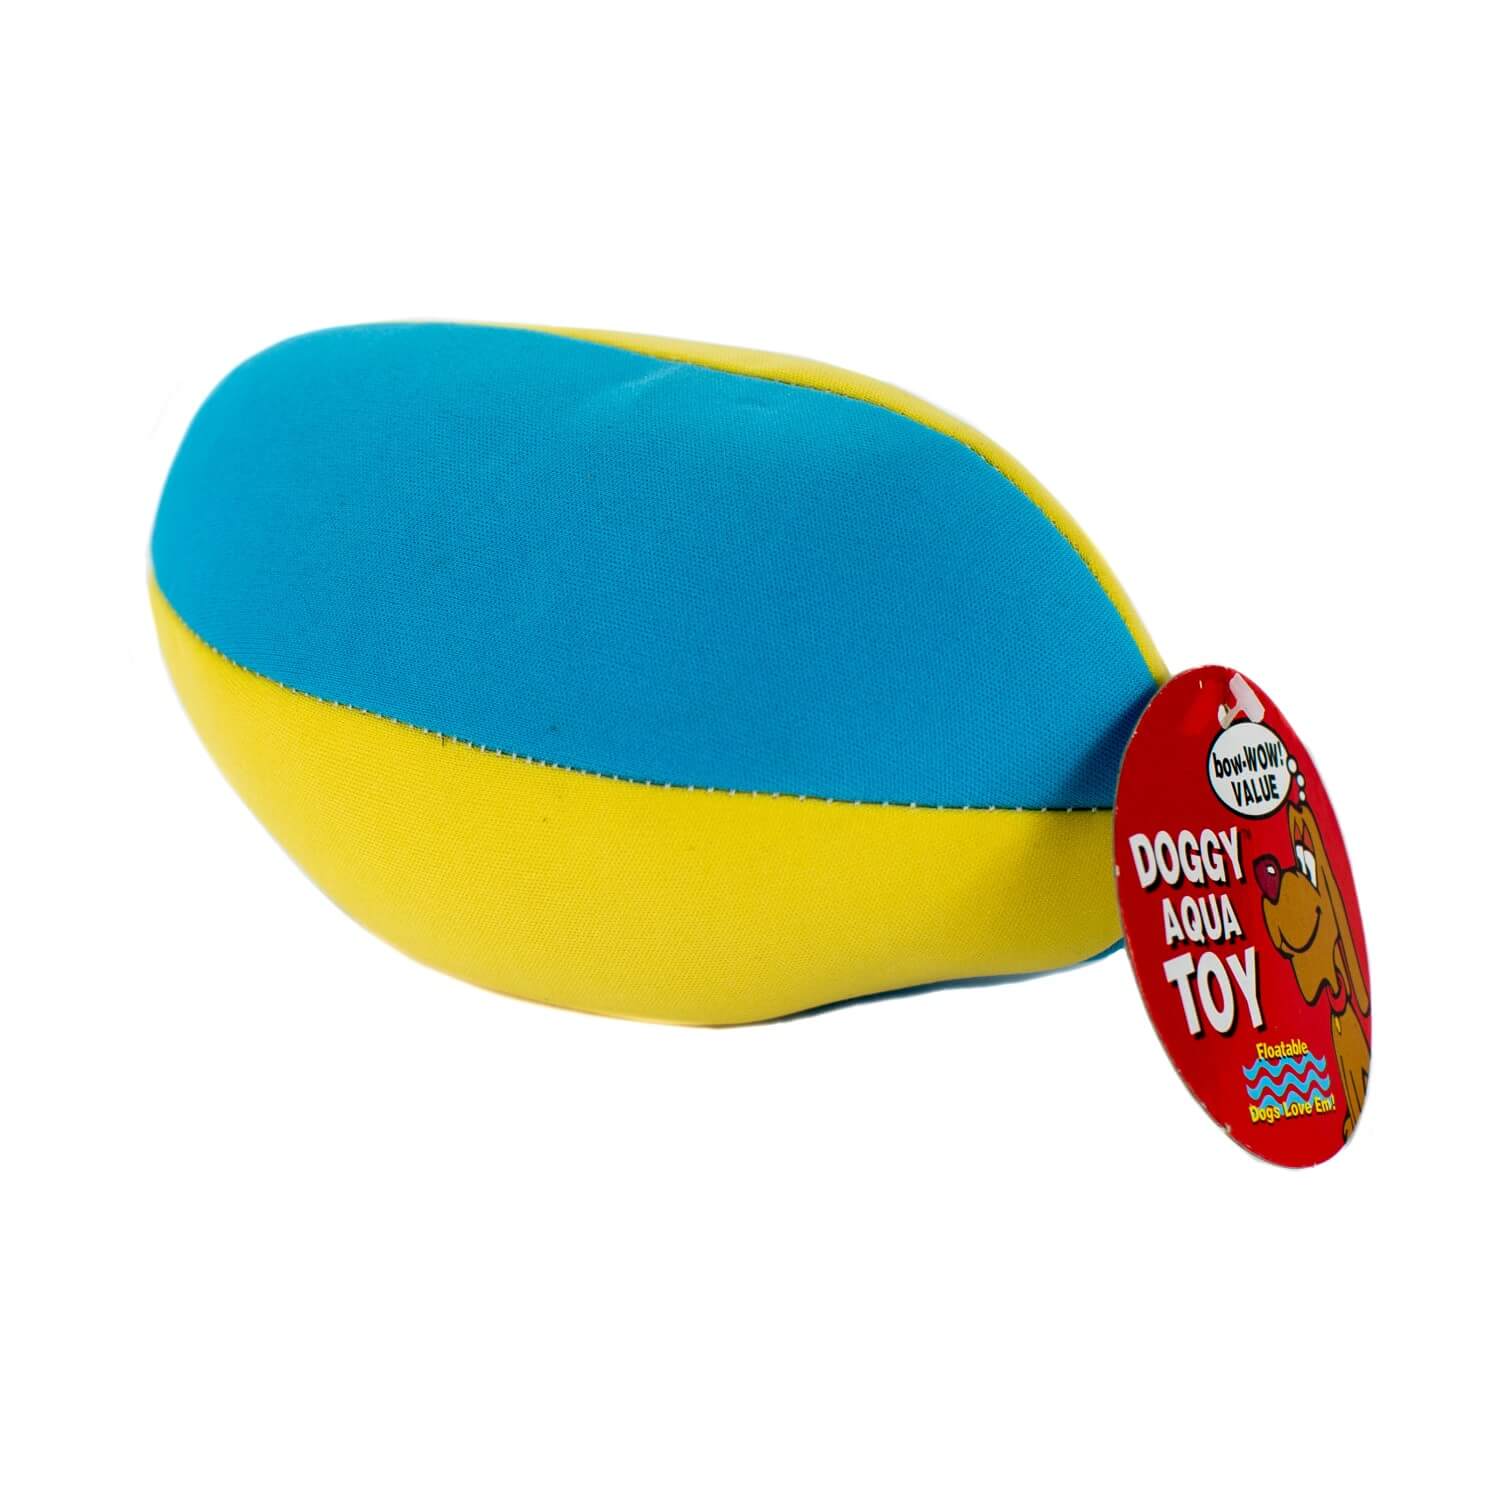 A blue and yellow Floating Water Football With Squeaker with a tag on it.